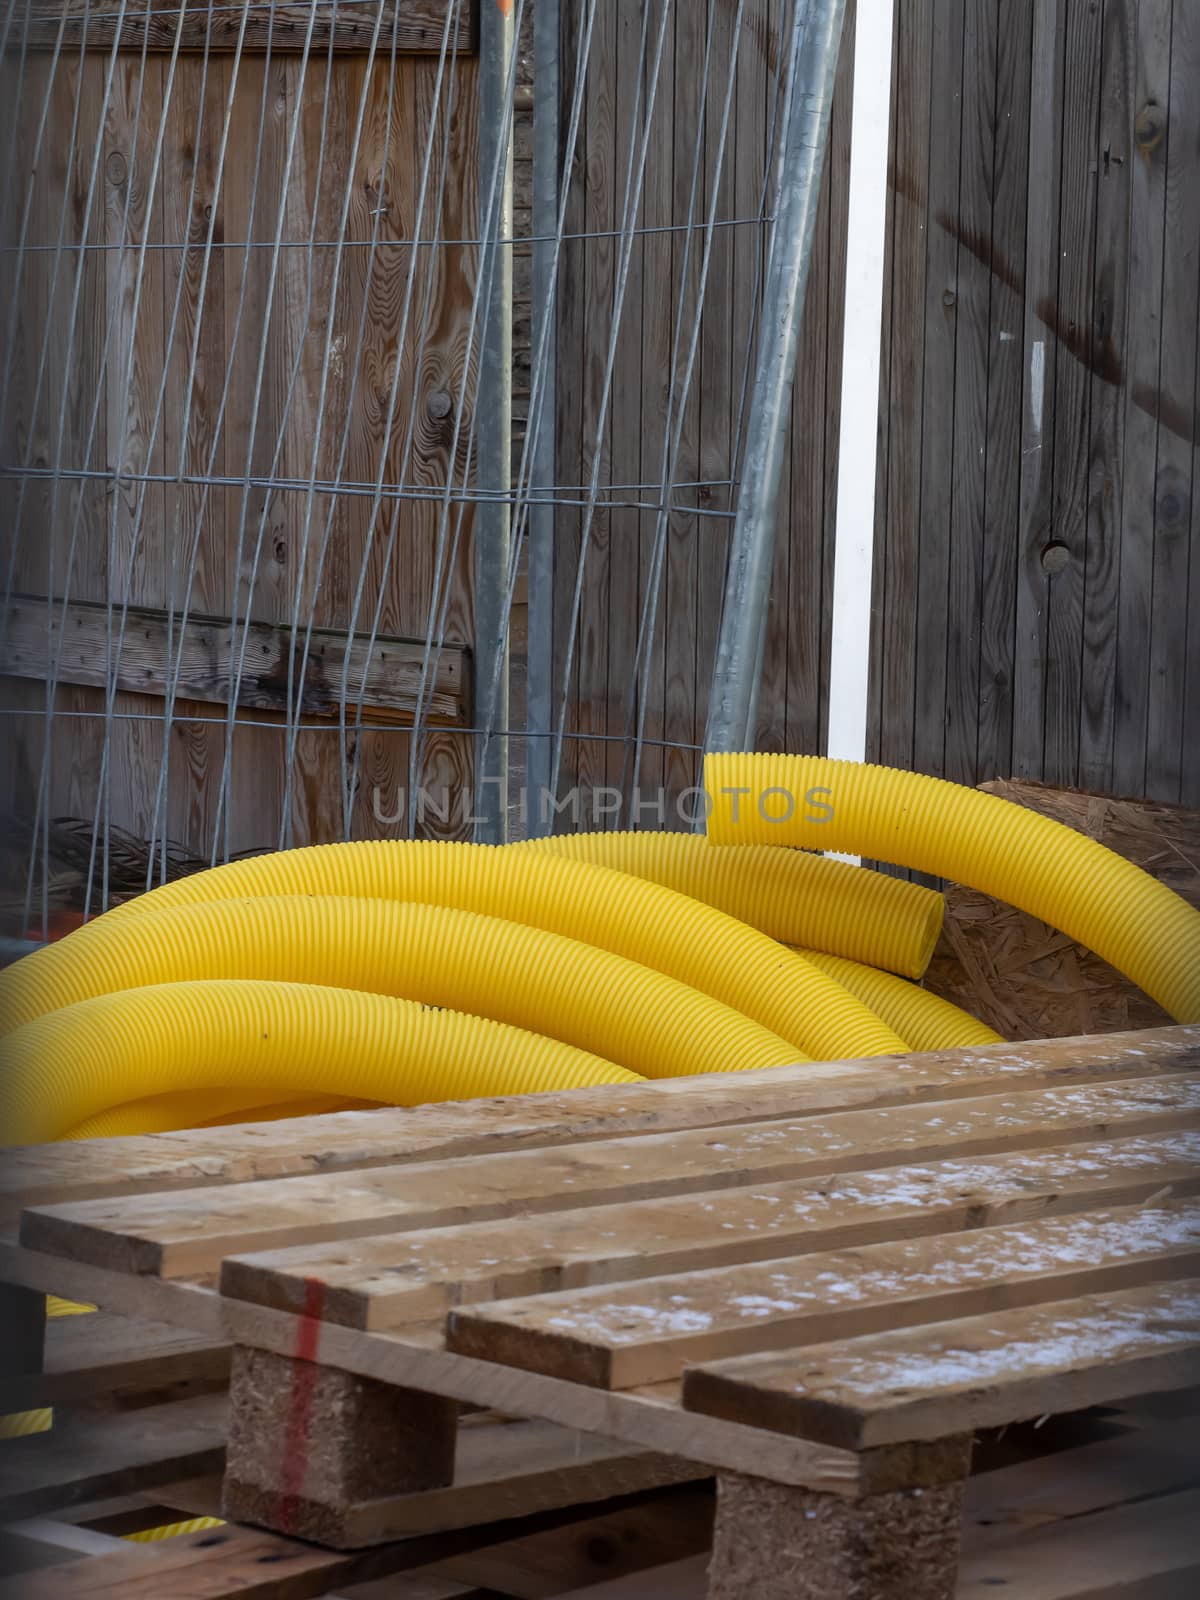 Hose, pallet and grid on a construction site by sandra_fotodesign